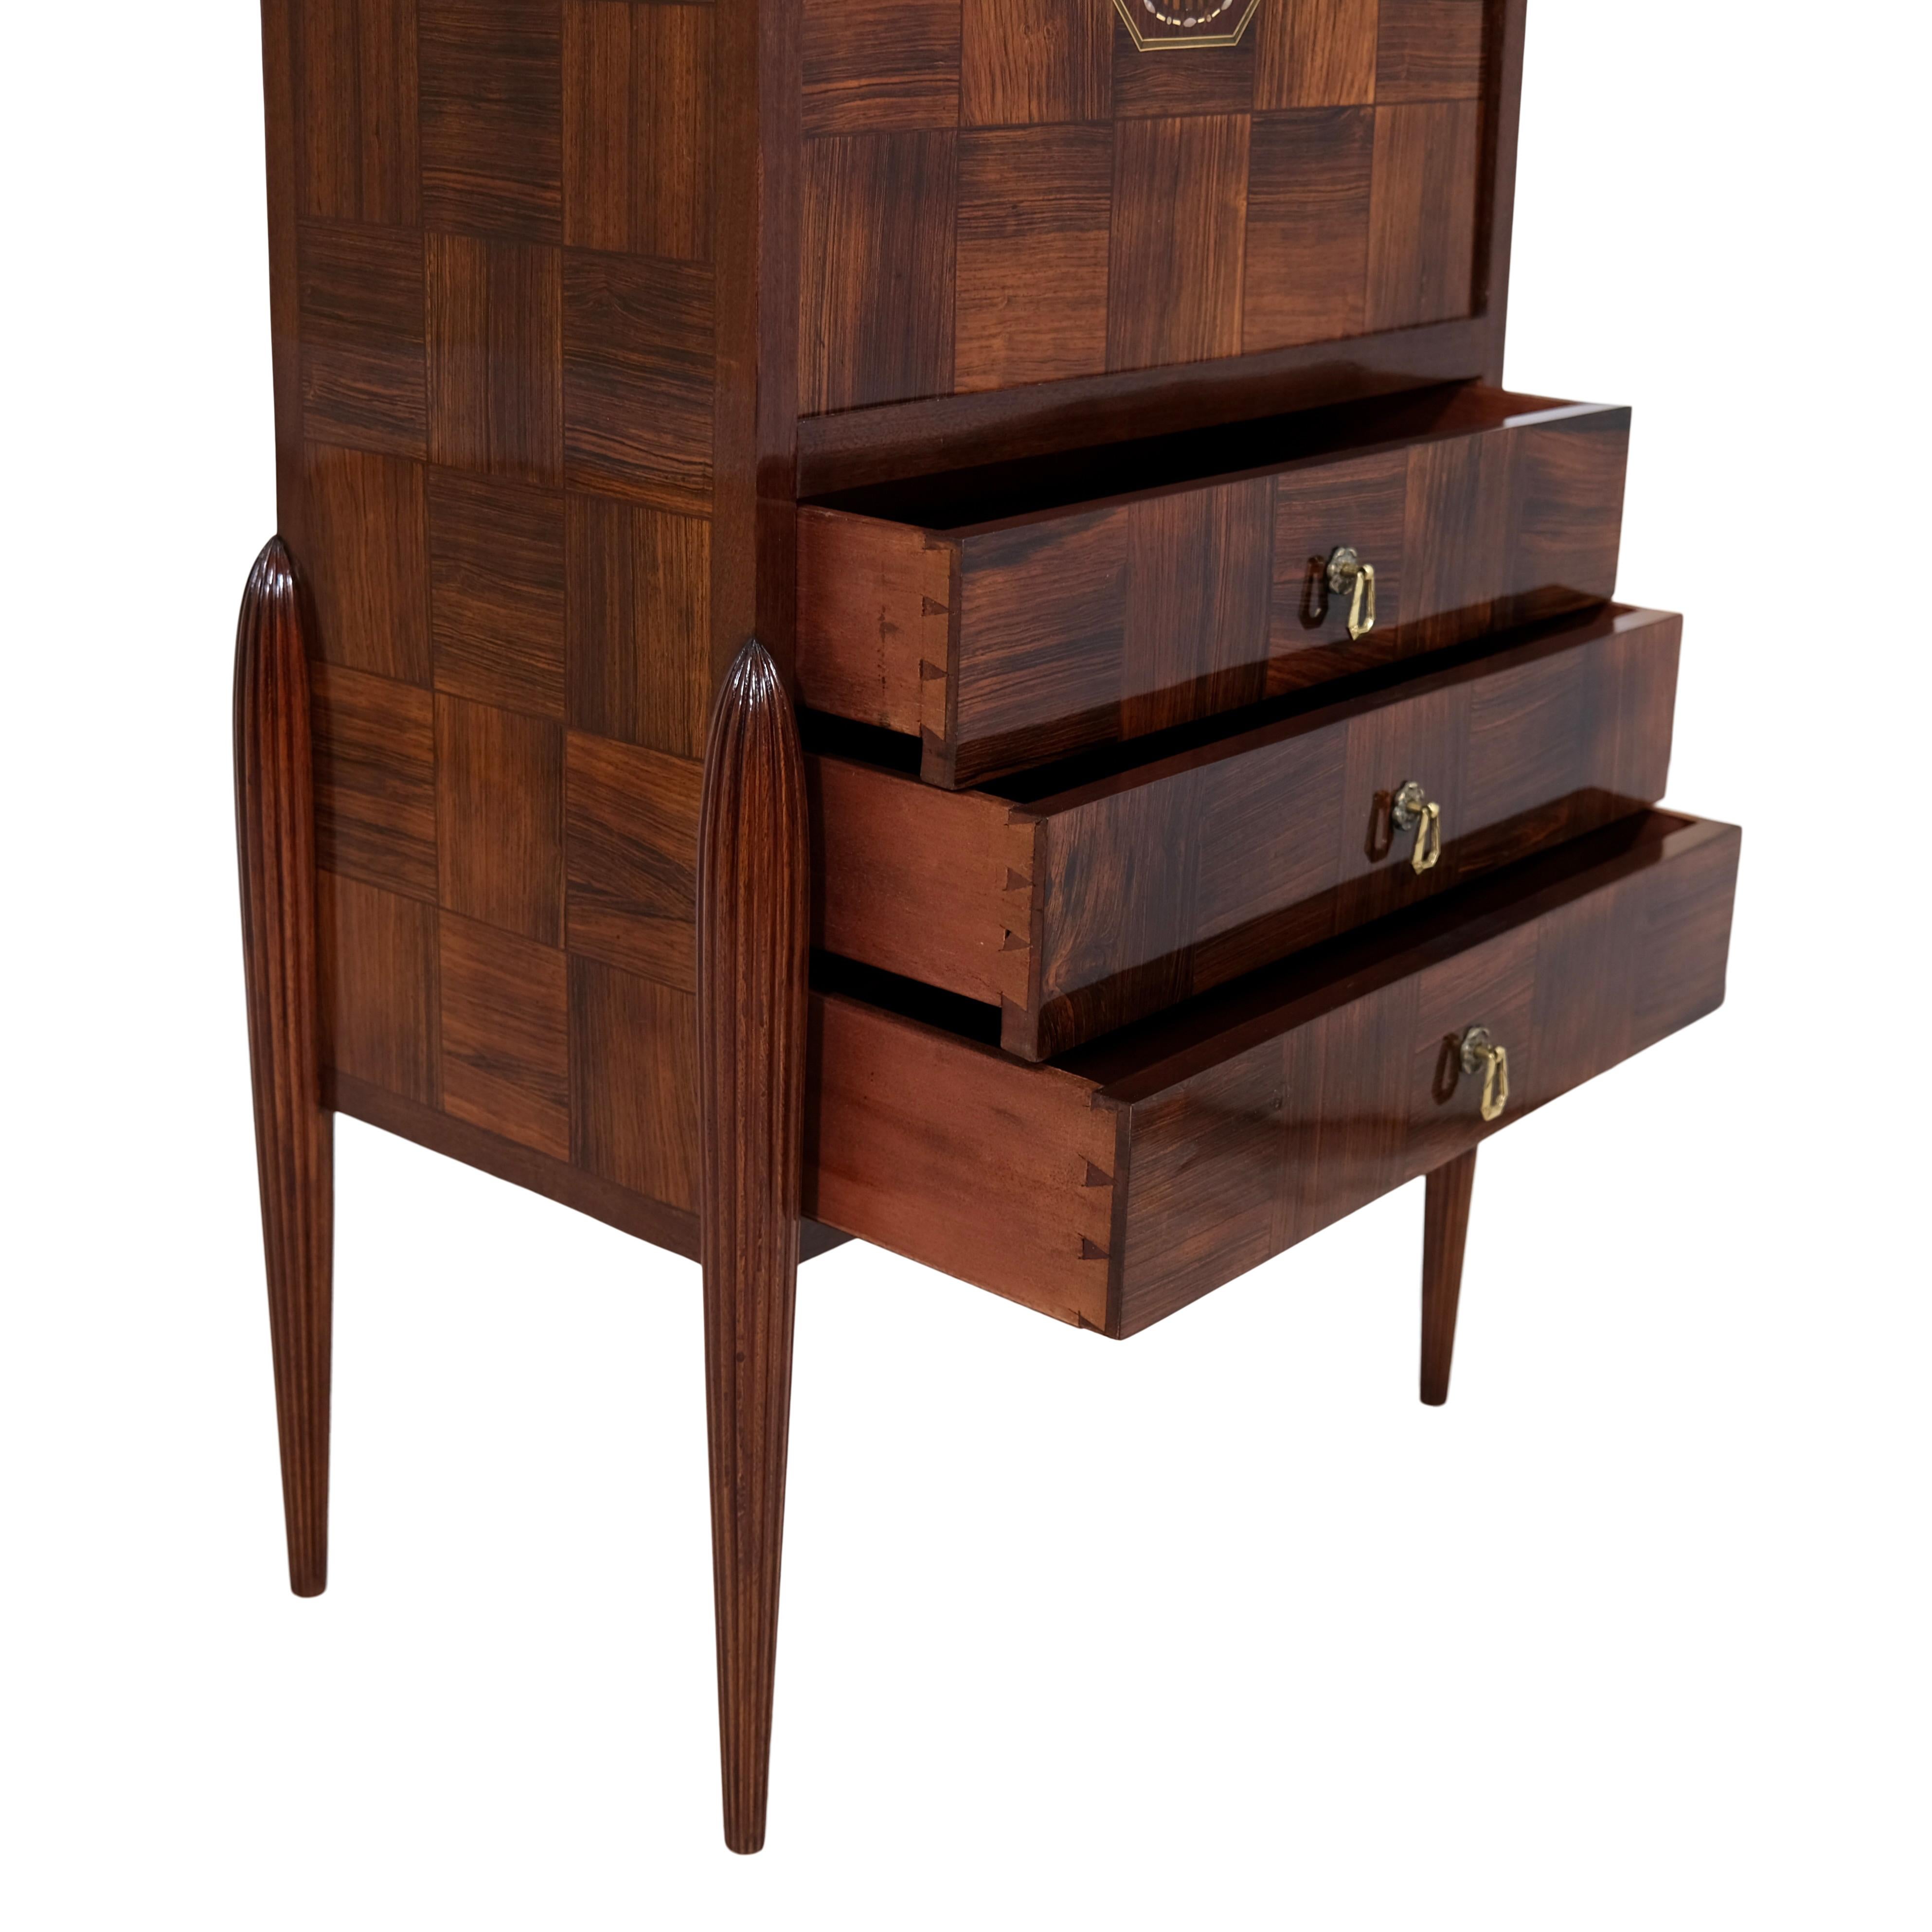 Early French Art Deco Secretaire Desk with Marquetry and Inlays For Sale 7